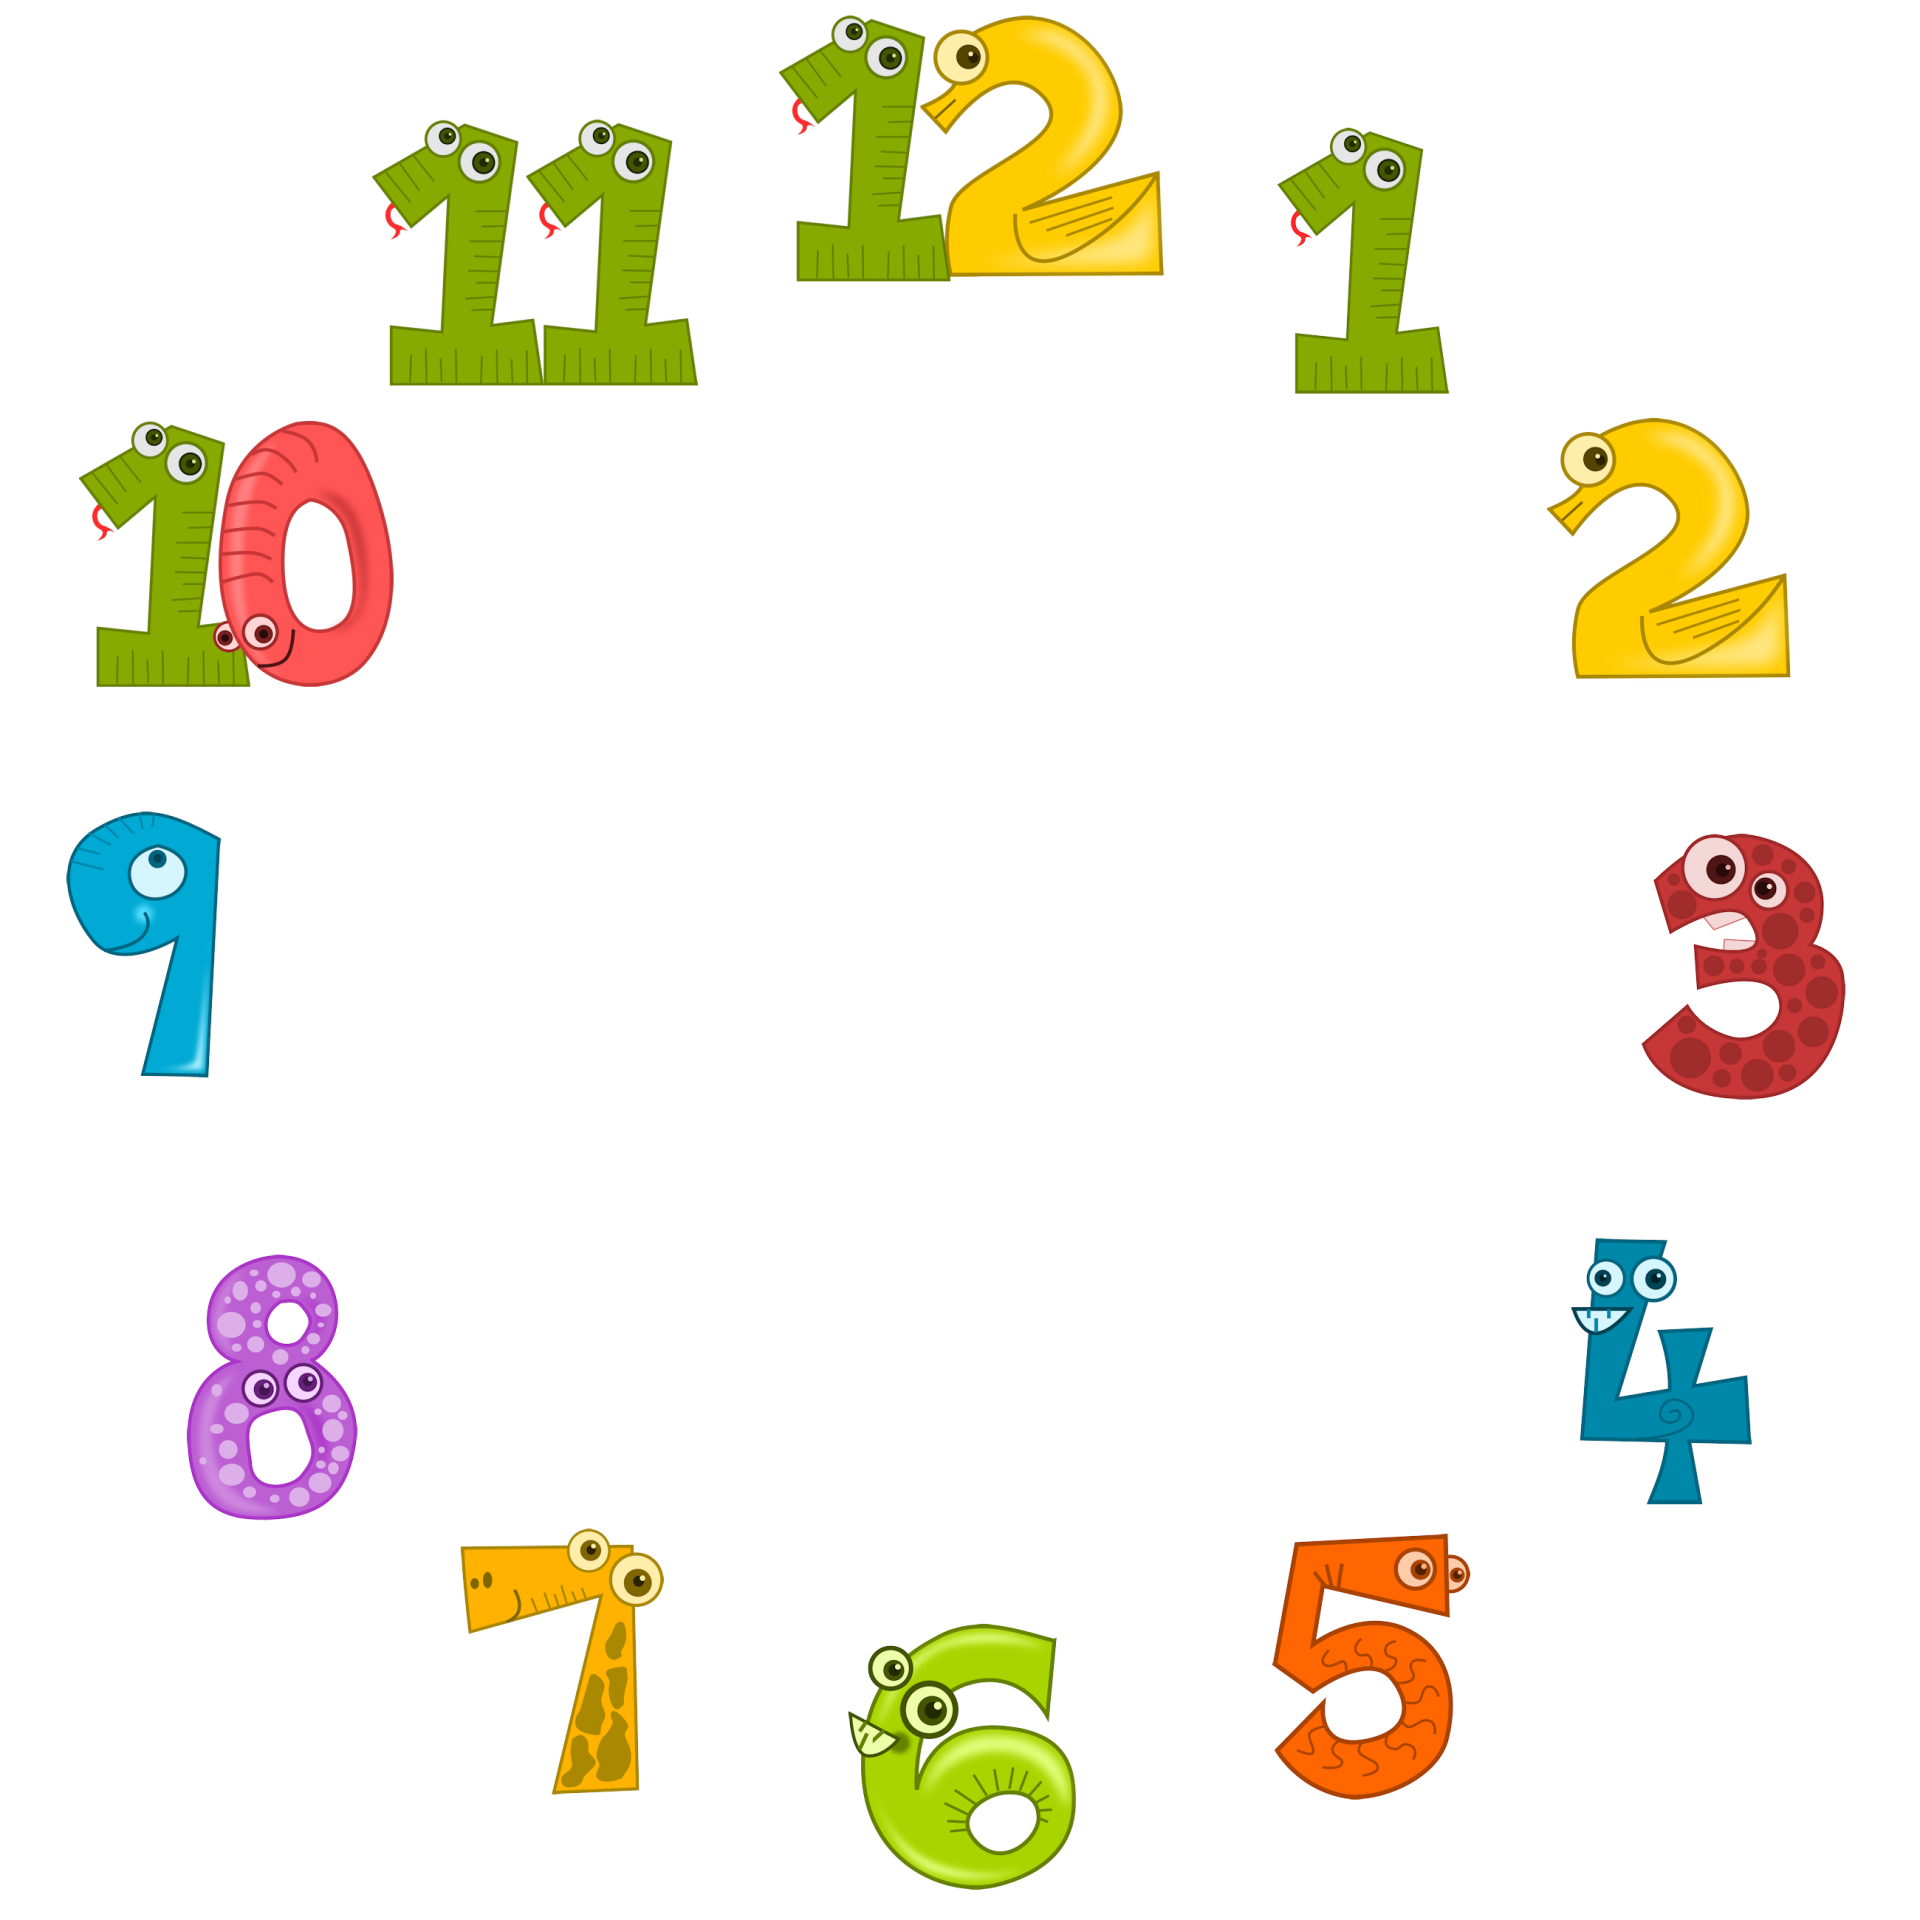 Clock face with colorful animal numbers